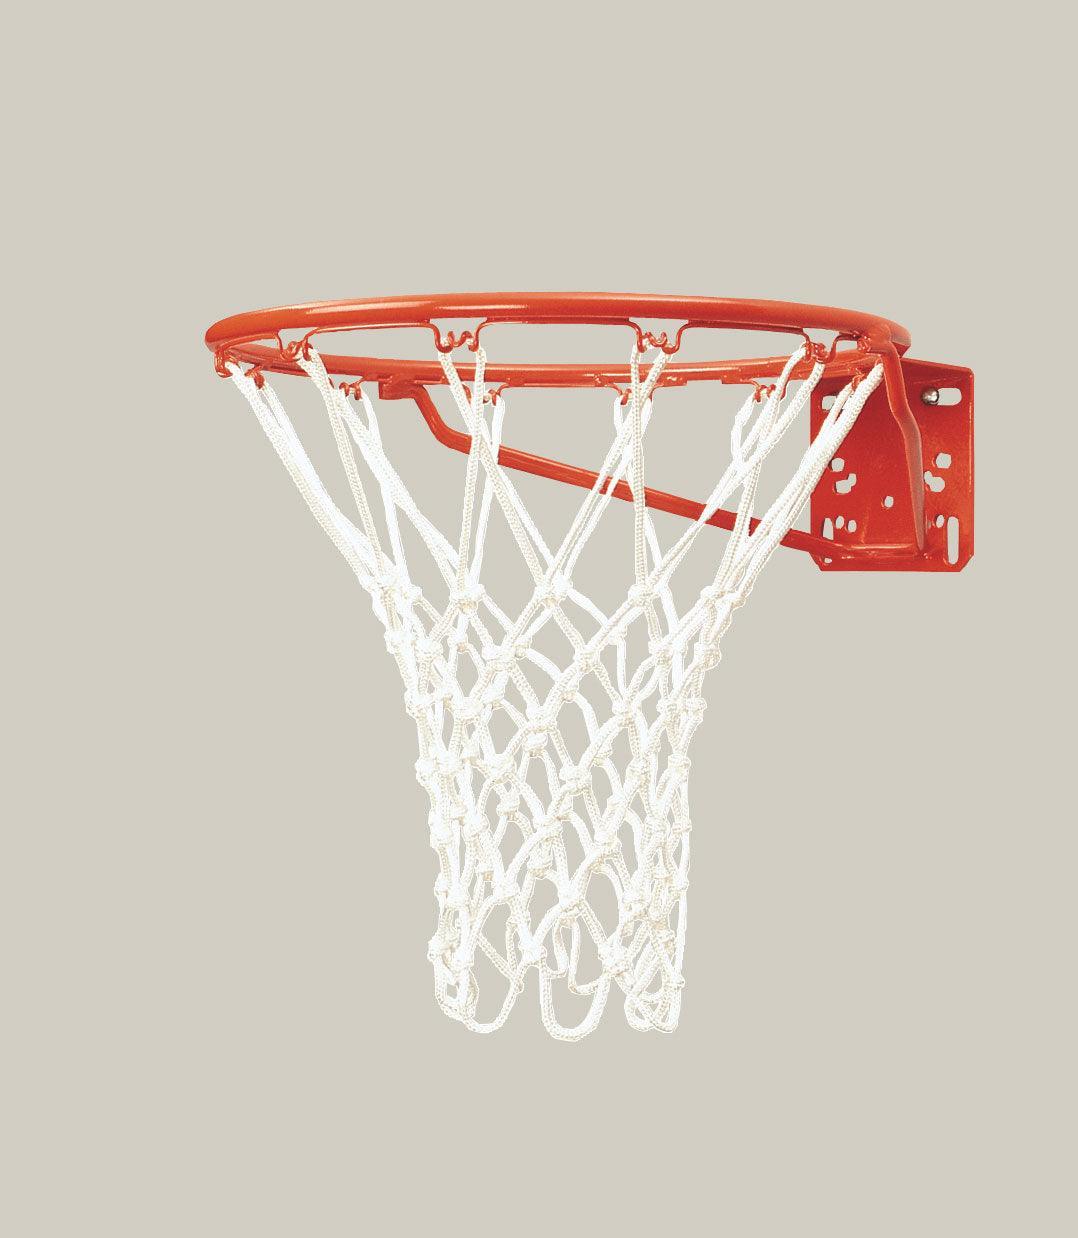 Standard Front Mount Competition Basketball Goal